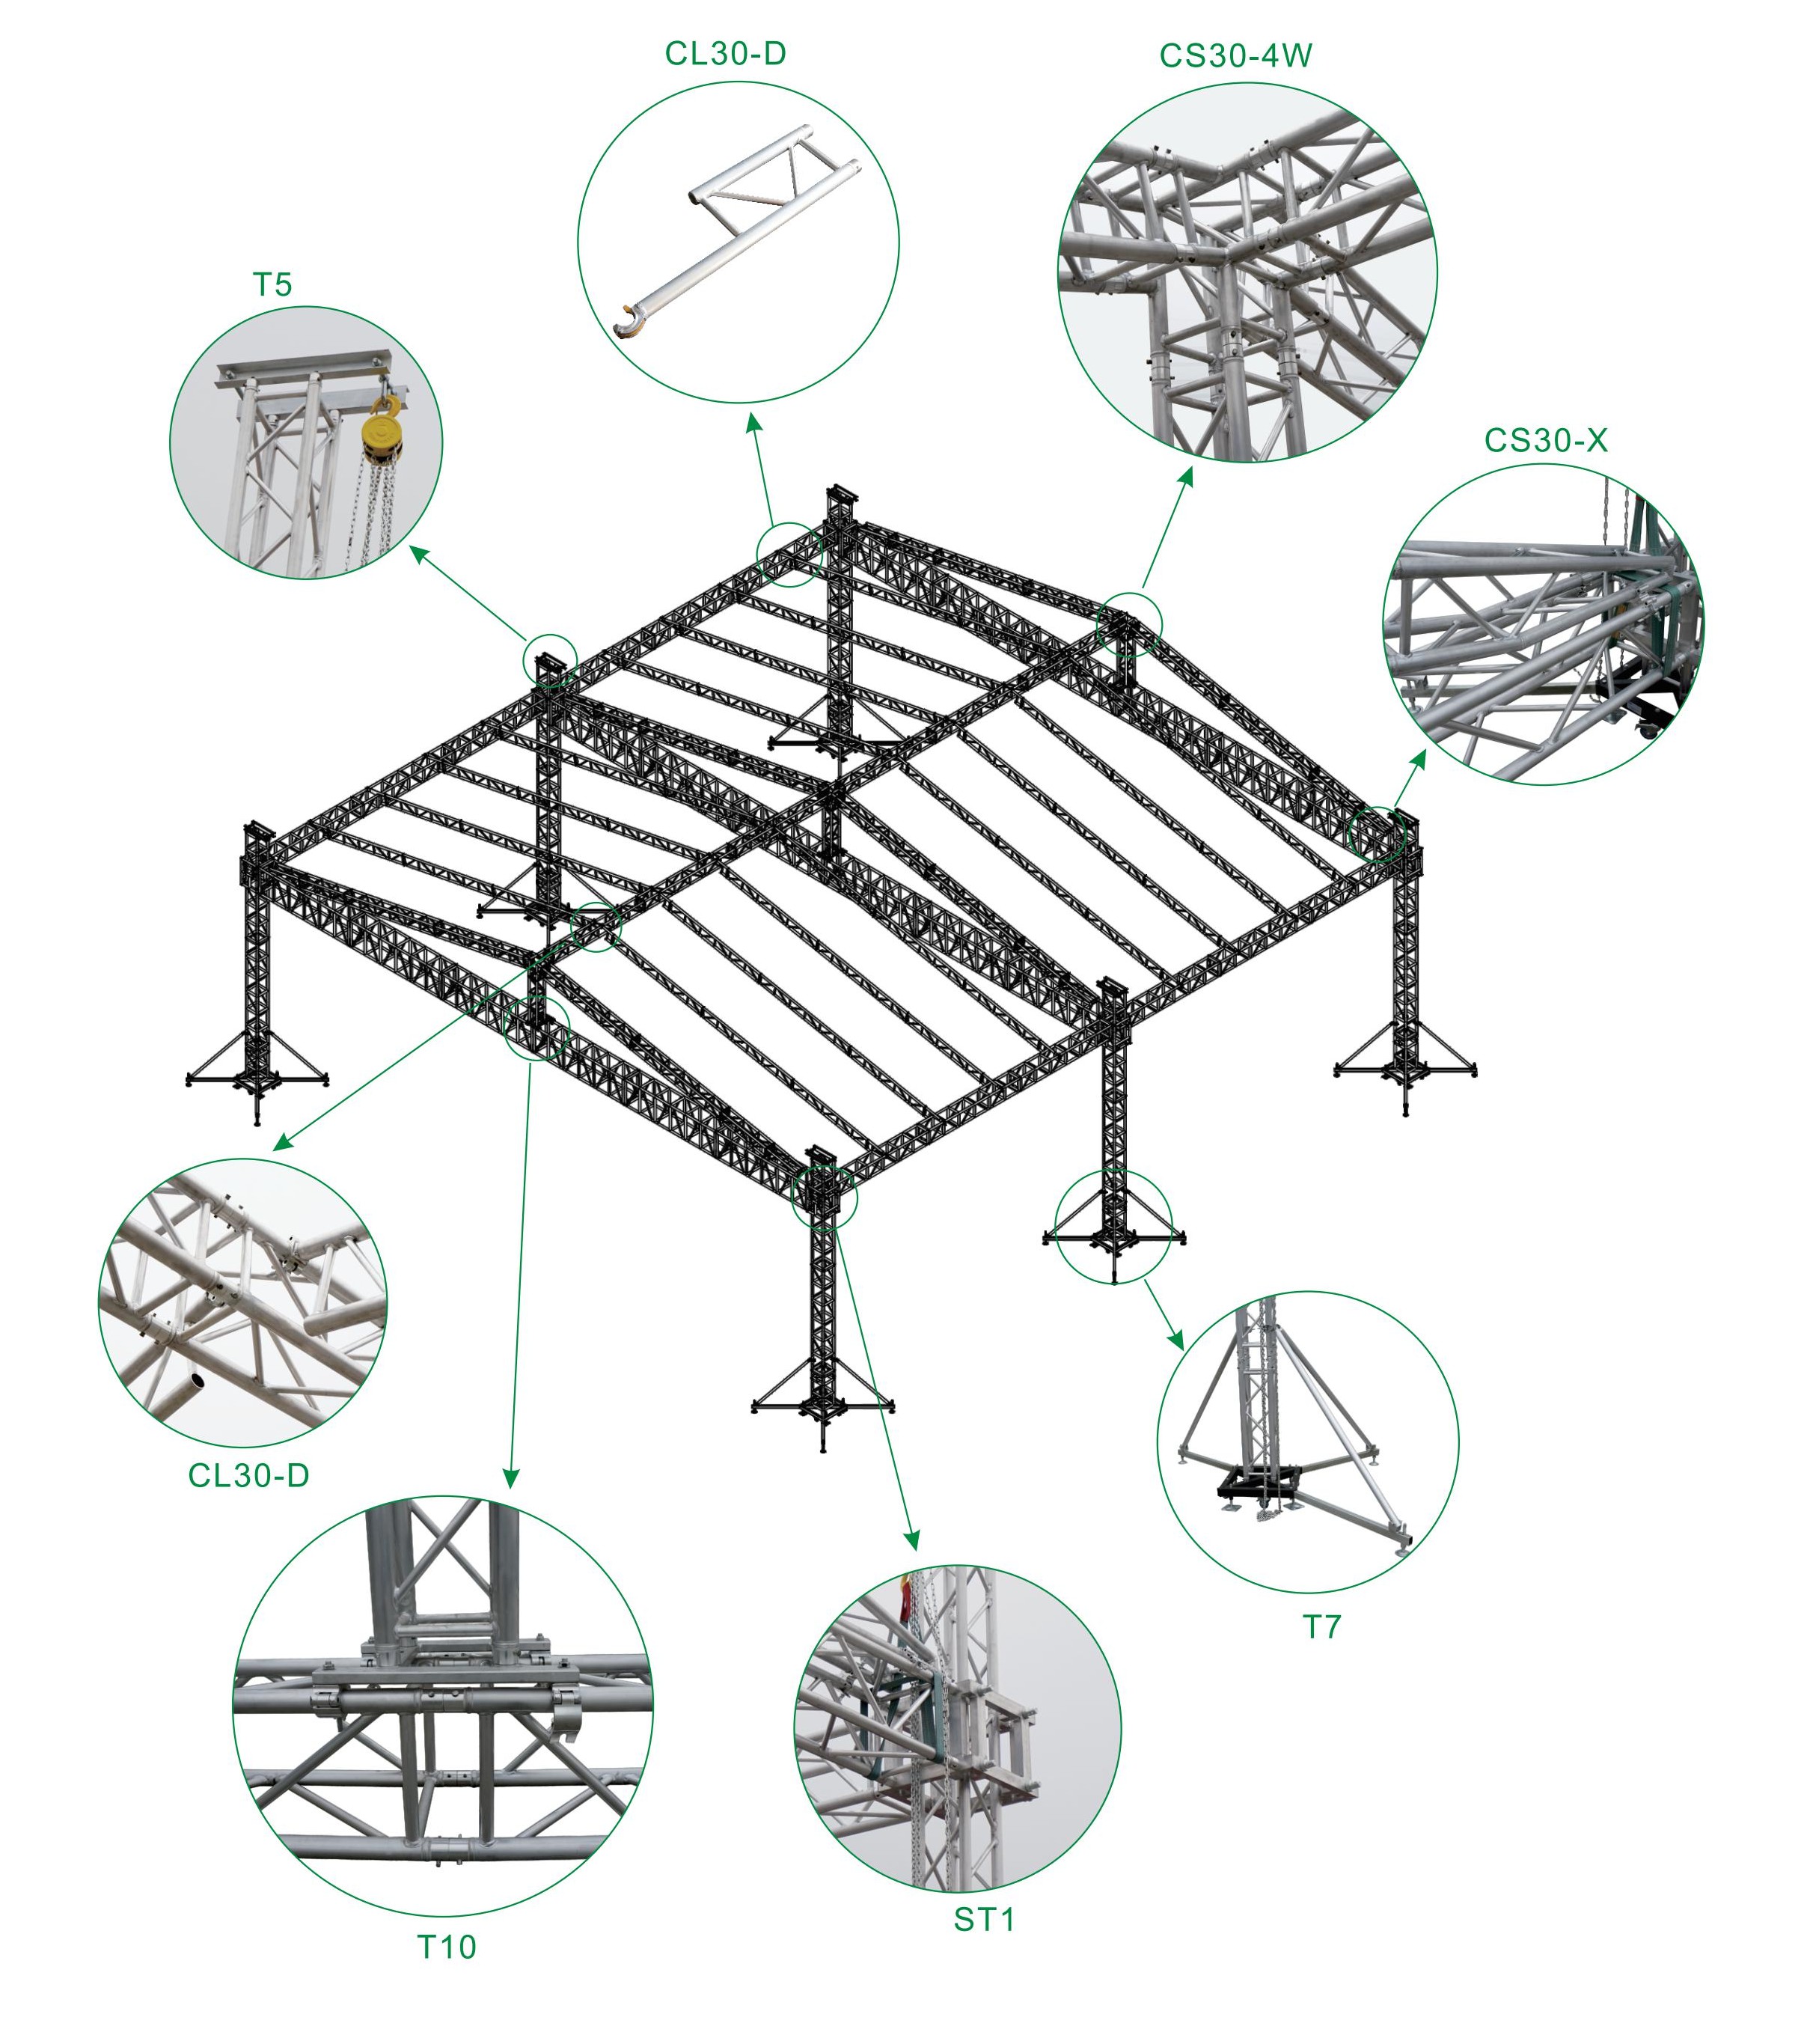 What types of lighting trusses are available, and what are their differences?